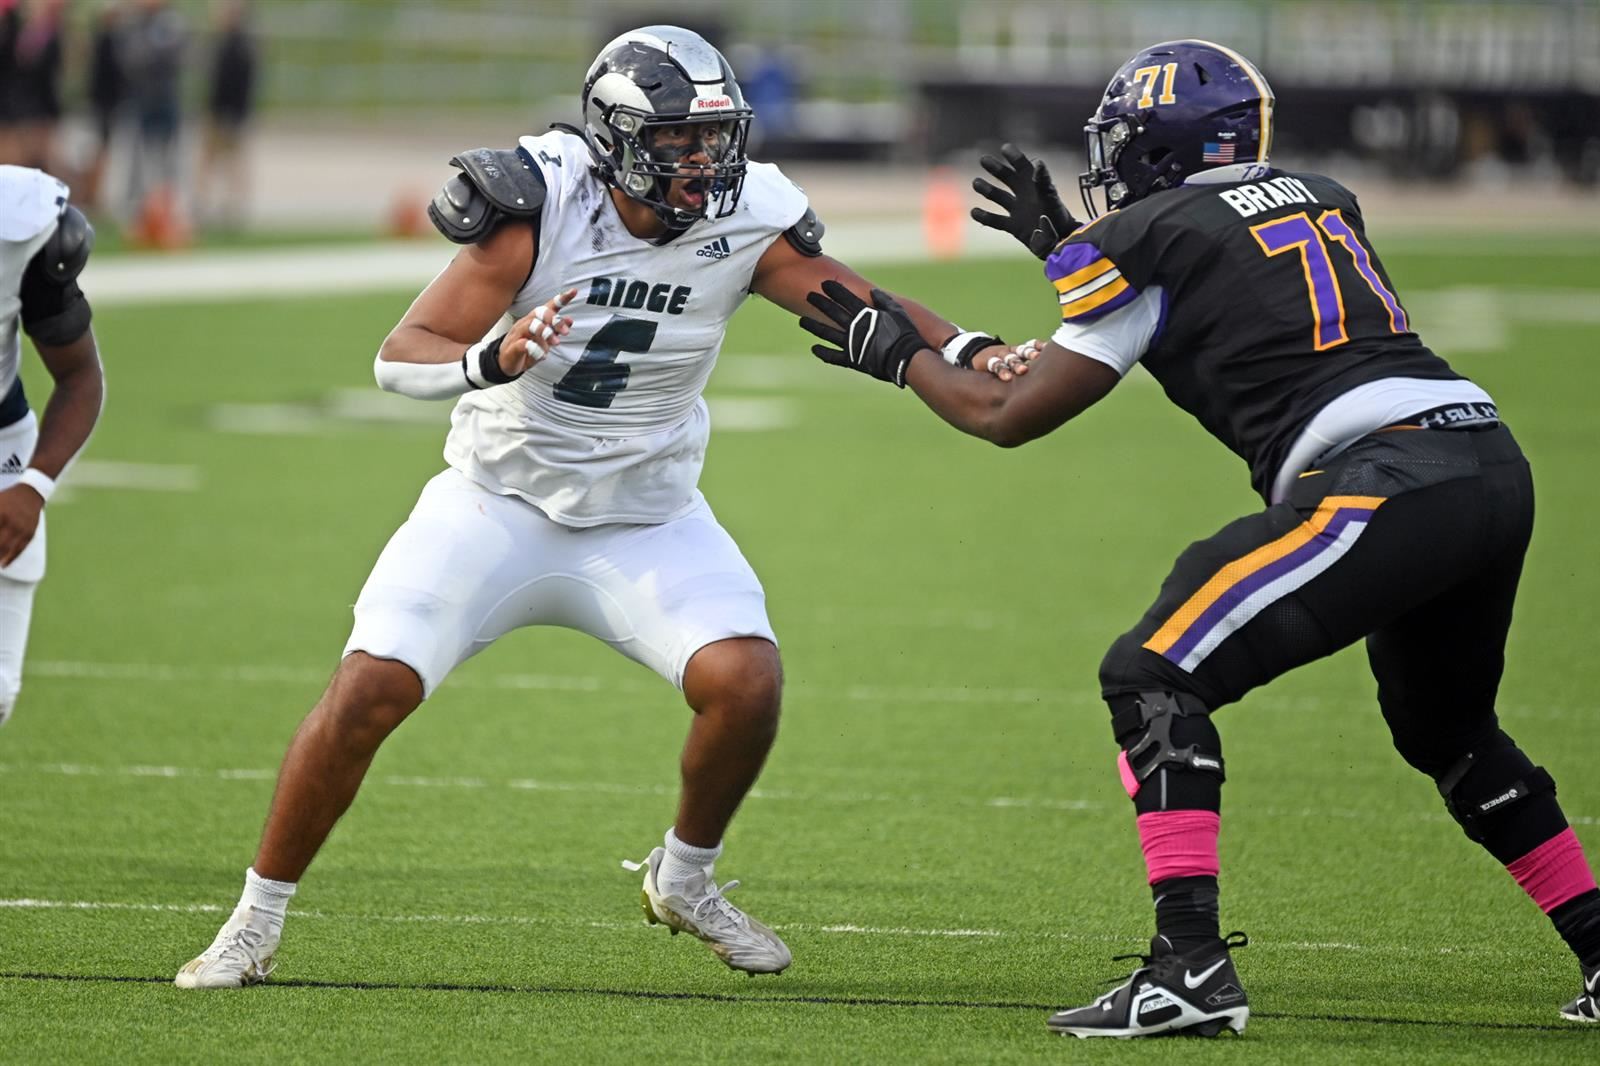 Cypress Ridge High School senior Greco Davila Torres was named to the All-District 17-6A second team at defensive line.